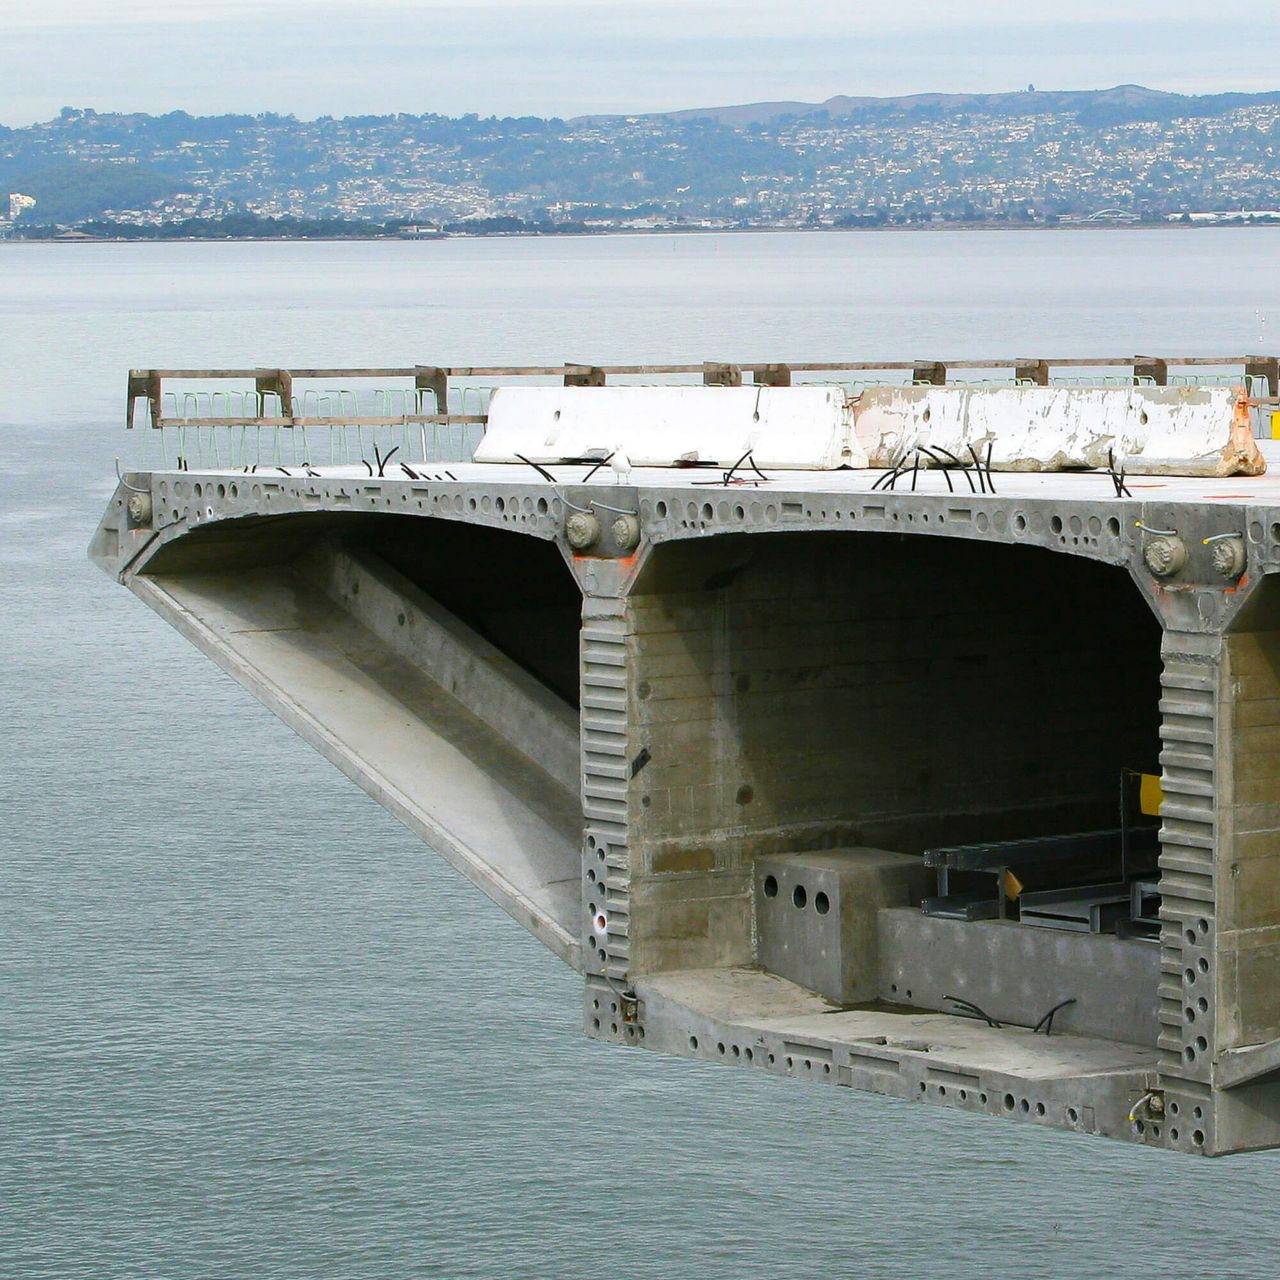 Bridge under construction over water with mountains in the background